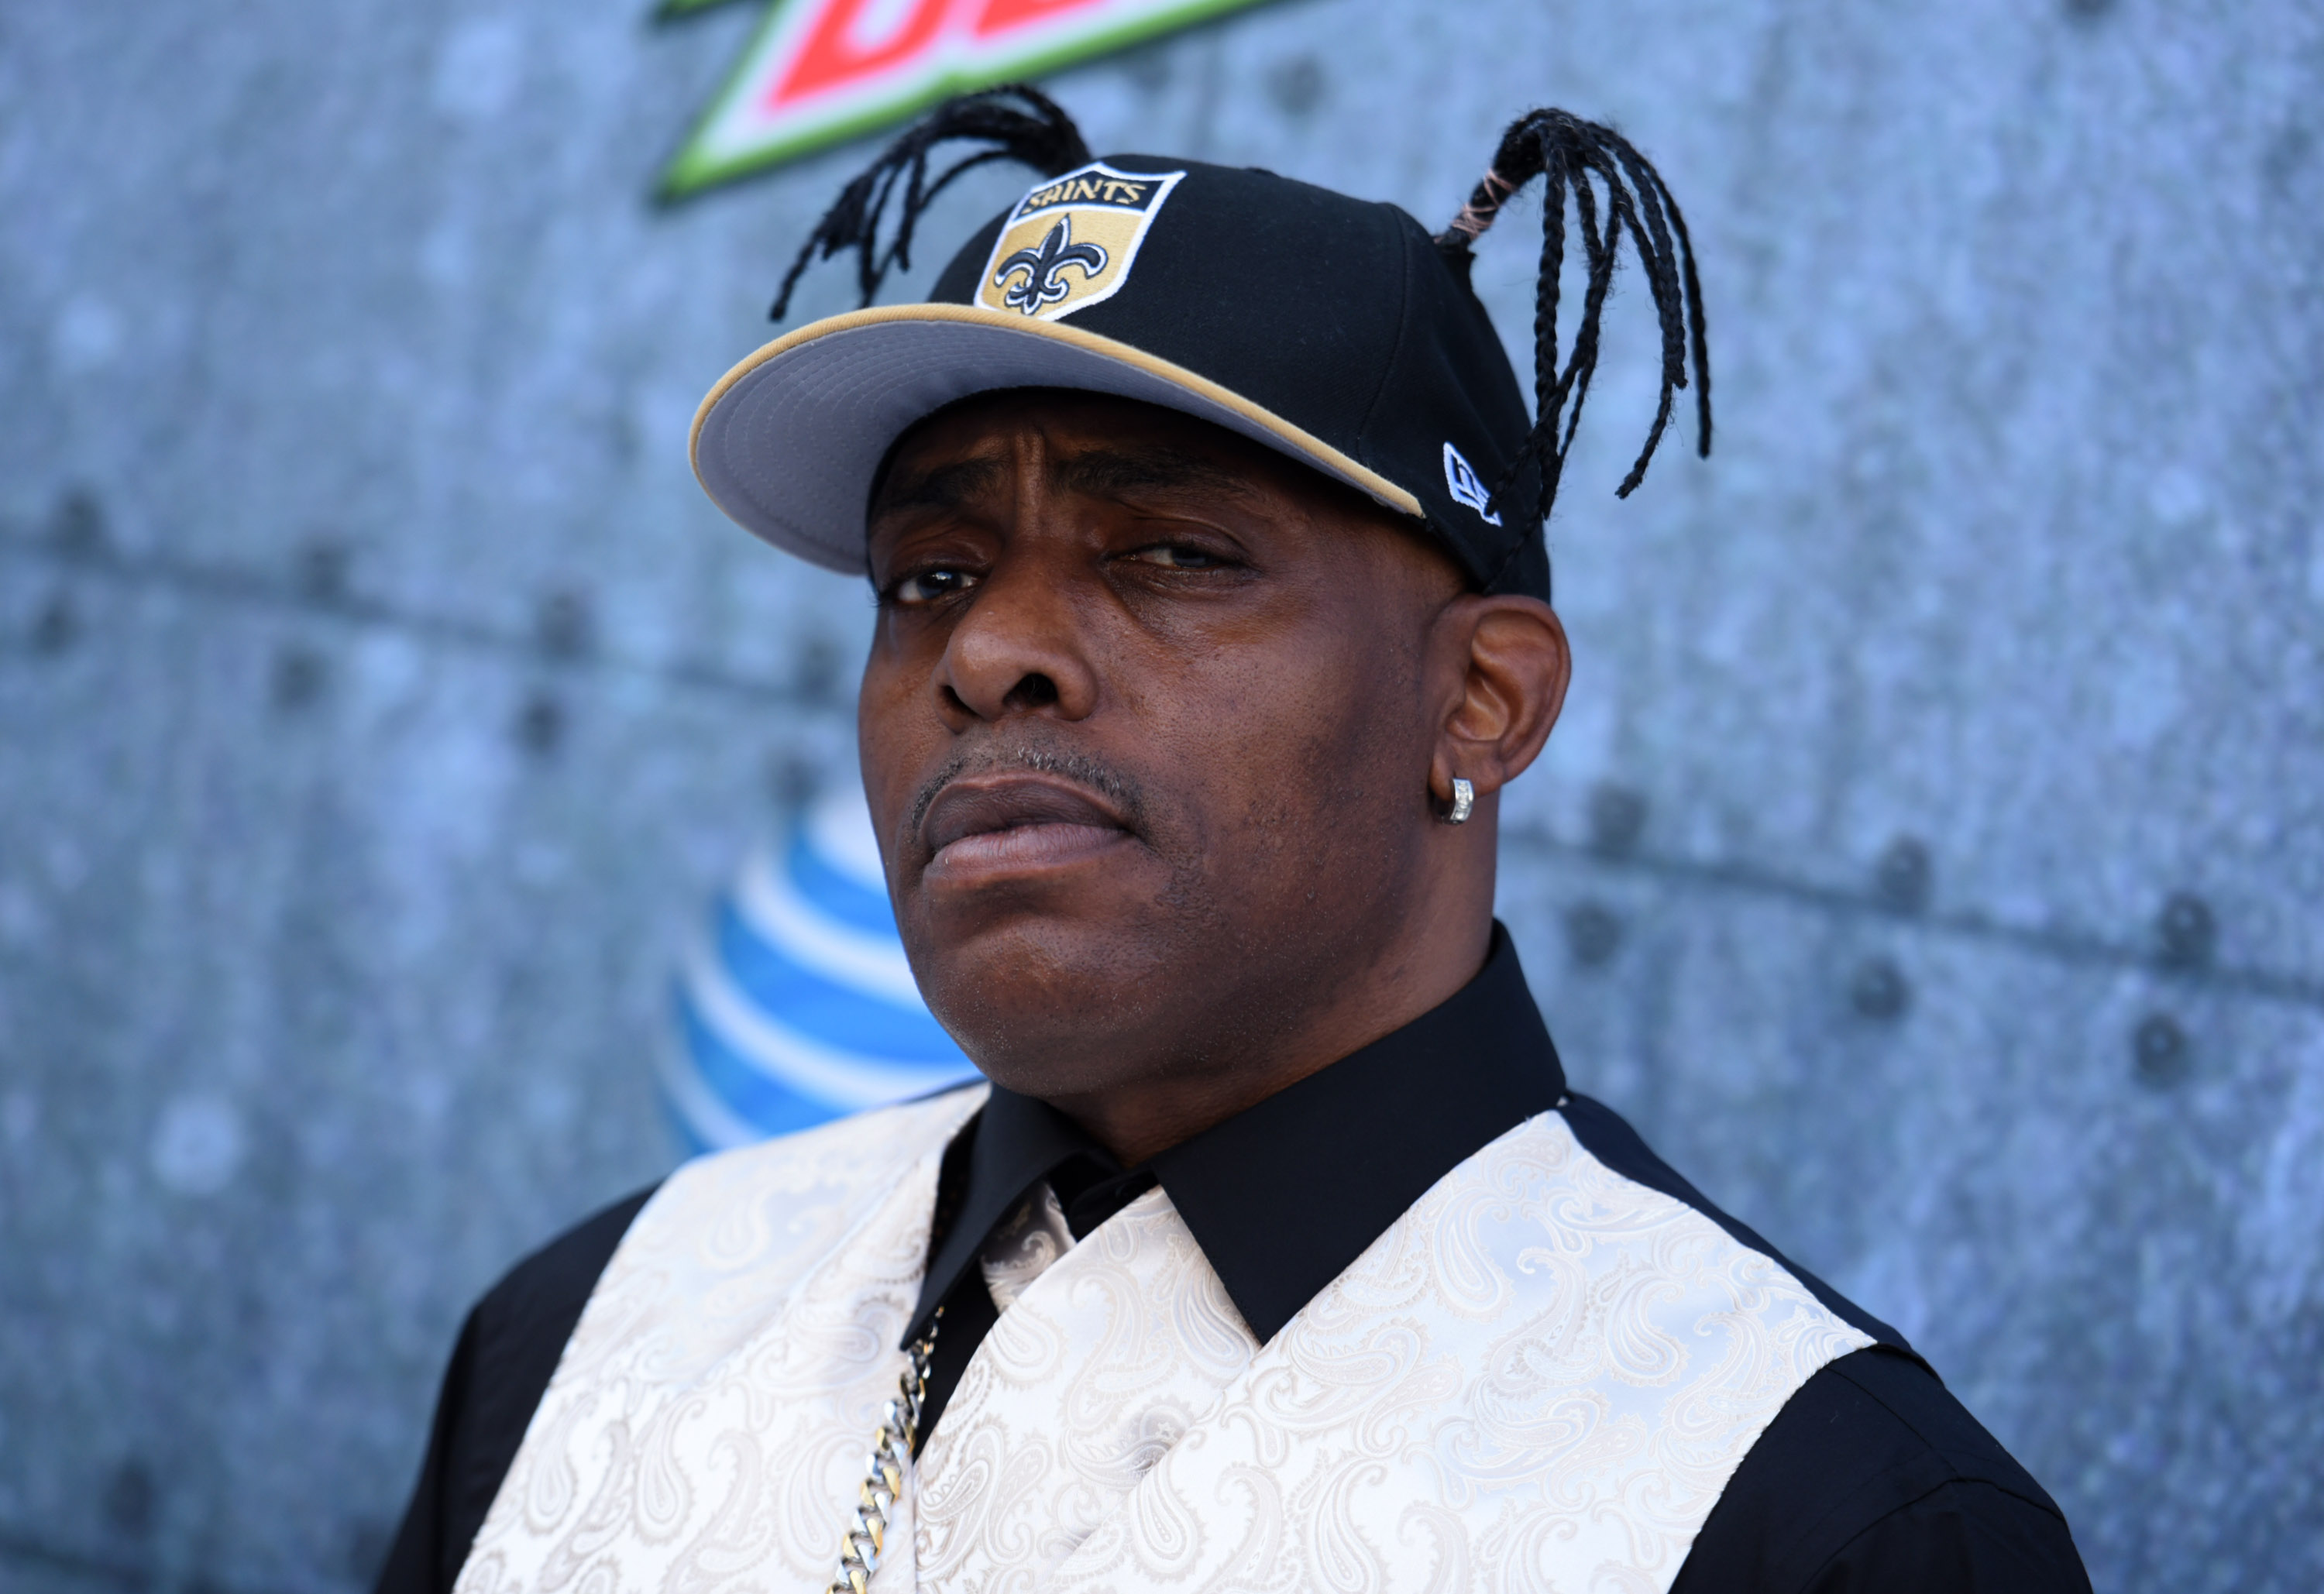 Coolio, rapper who won Grammy for hit ‘Gangsta’s Paradise,’ dies at 59, manager says